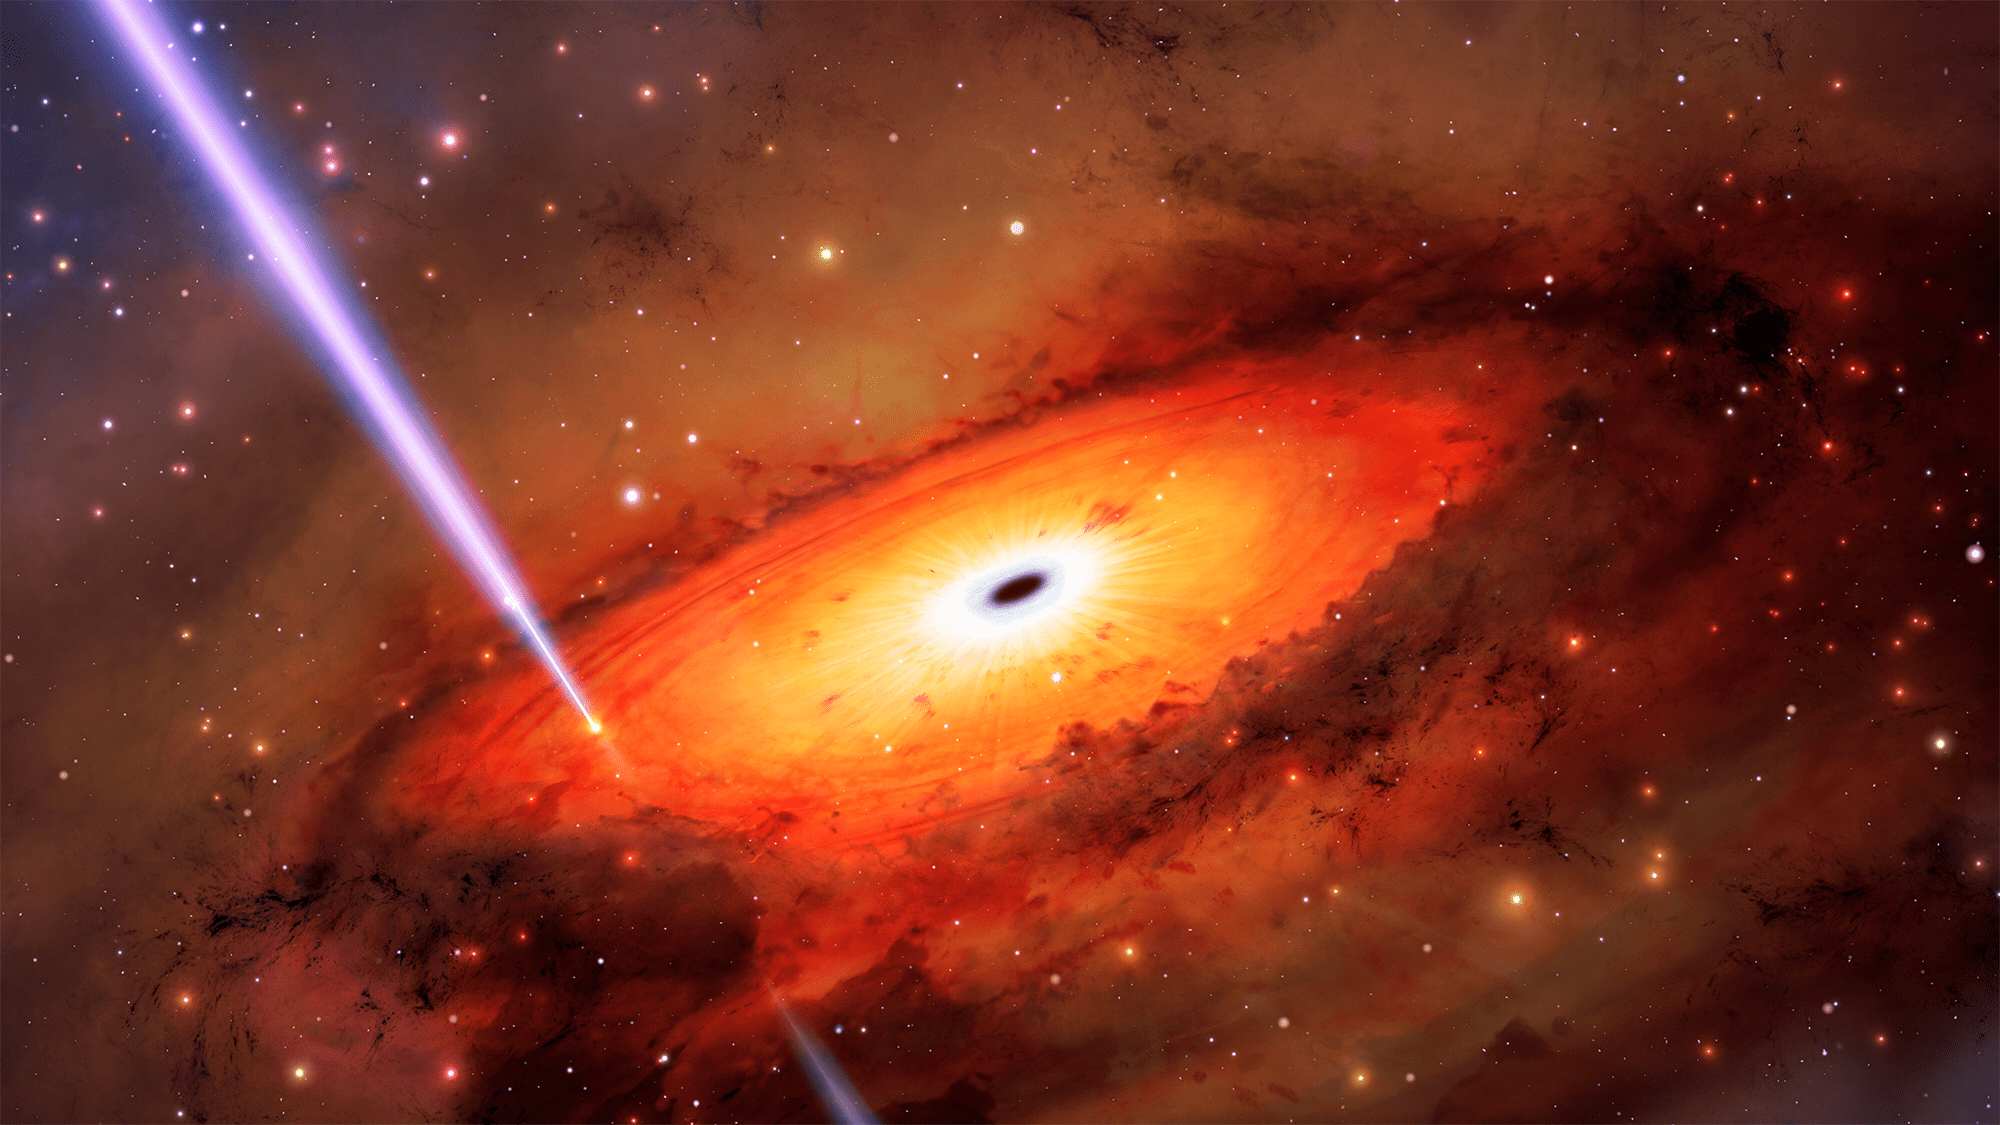 Explosive star ‘demolition derby’ observed for the very first time